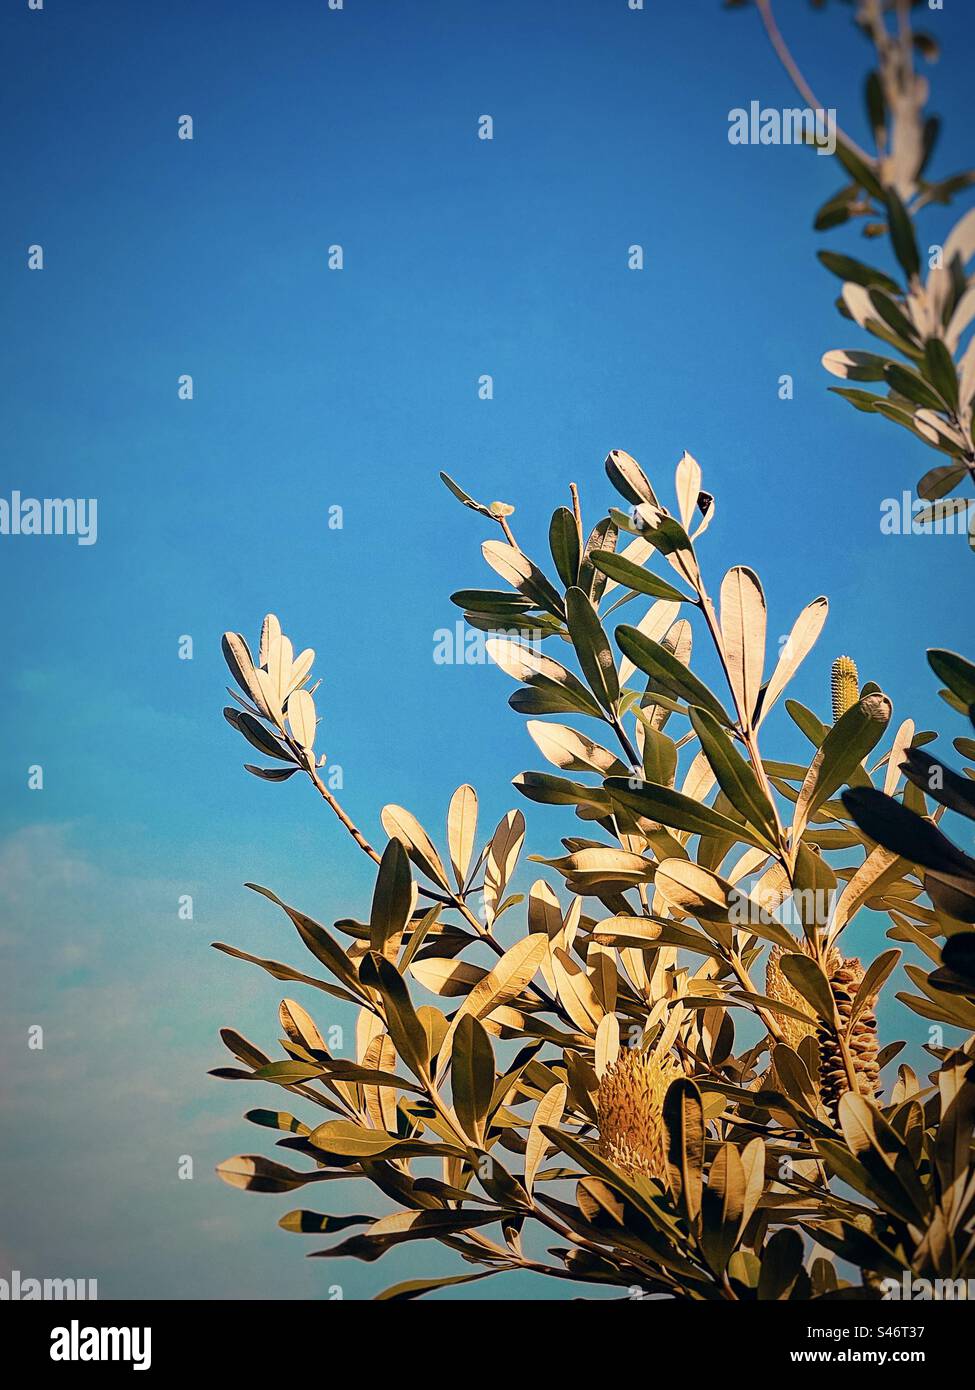 Low angle view of Banksia integrifolia commonly known as the coast banksia, with yellow flower and cone/seed head against blue sky. Australian native flora. Copy space. Stock Photo